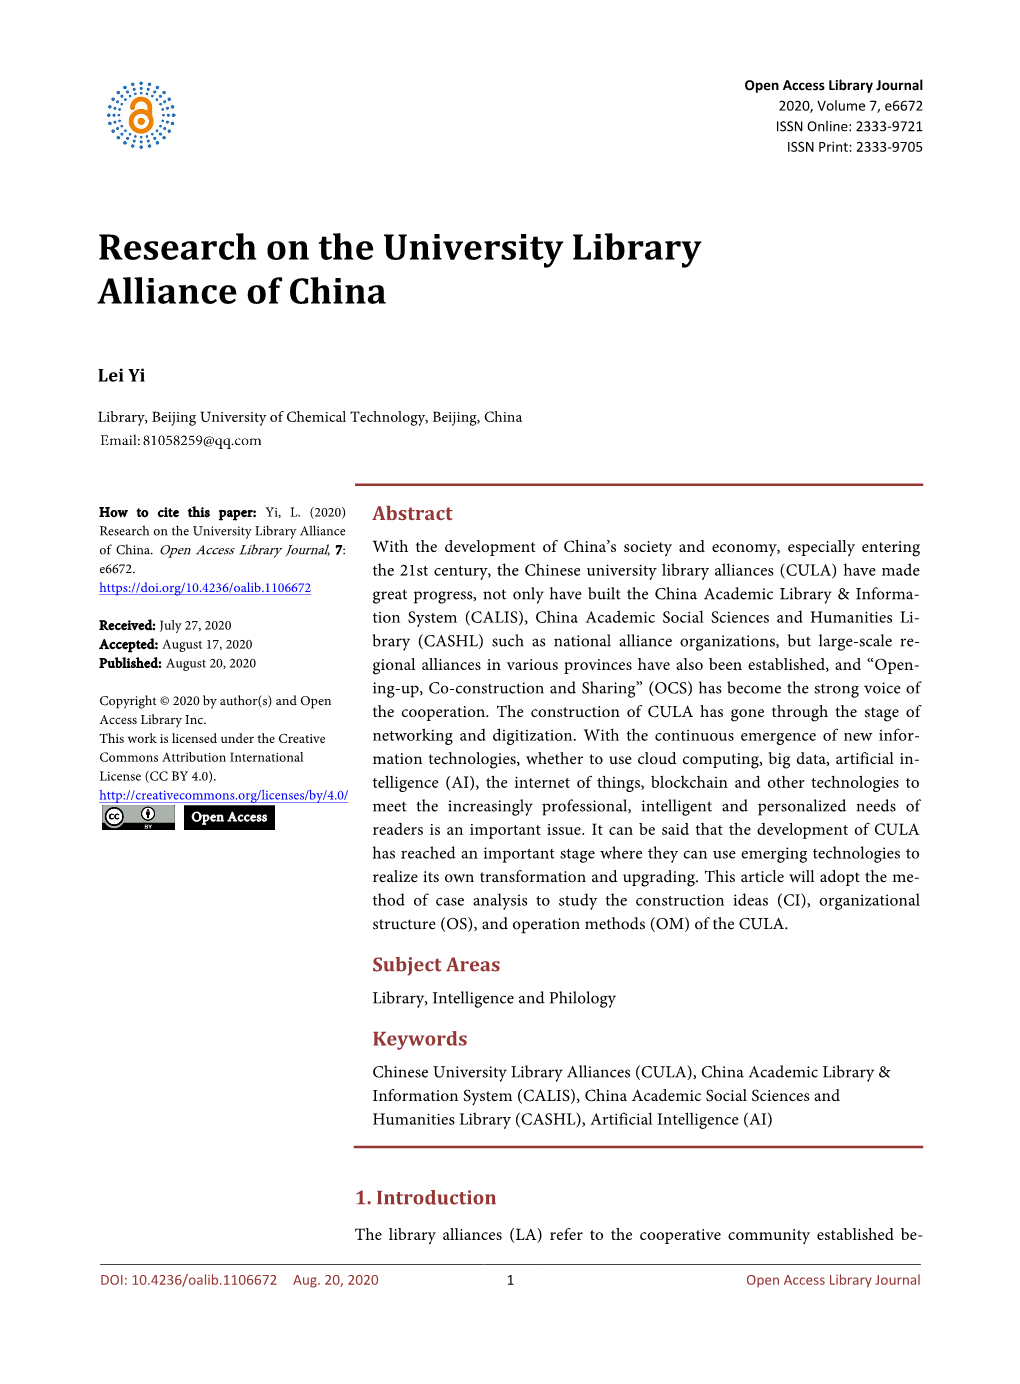 Research on the University Library Alliance of China